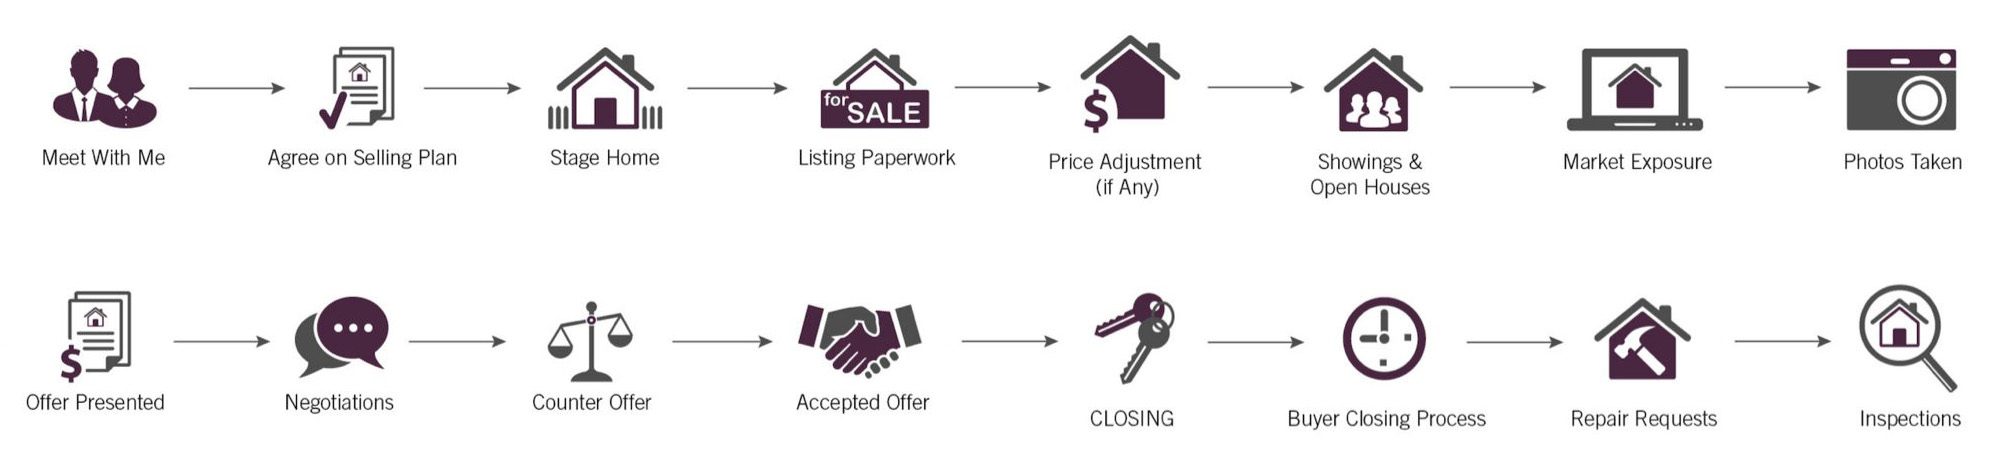 The selling process as an infographic.